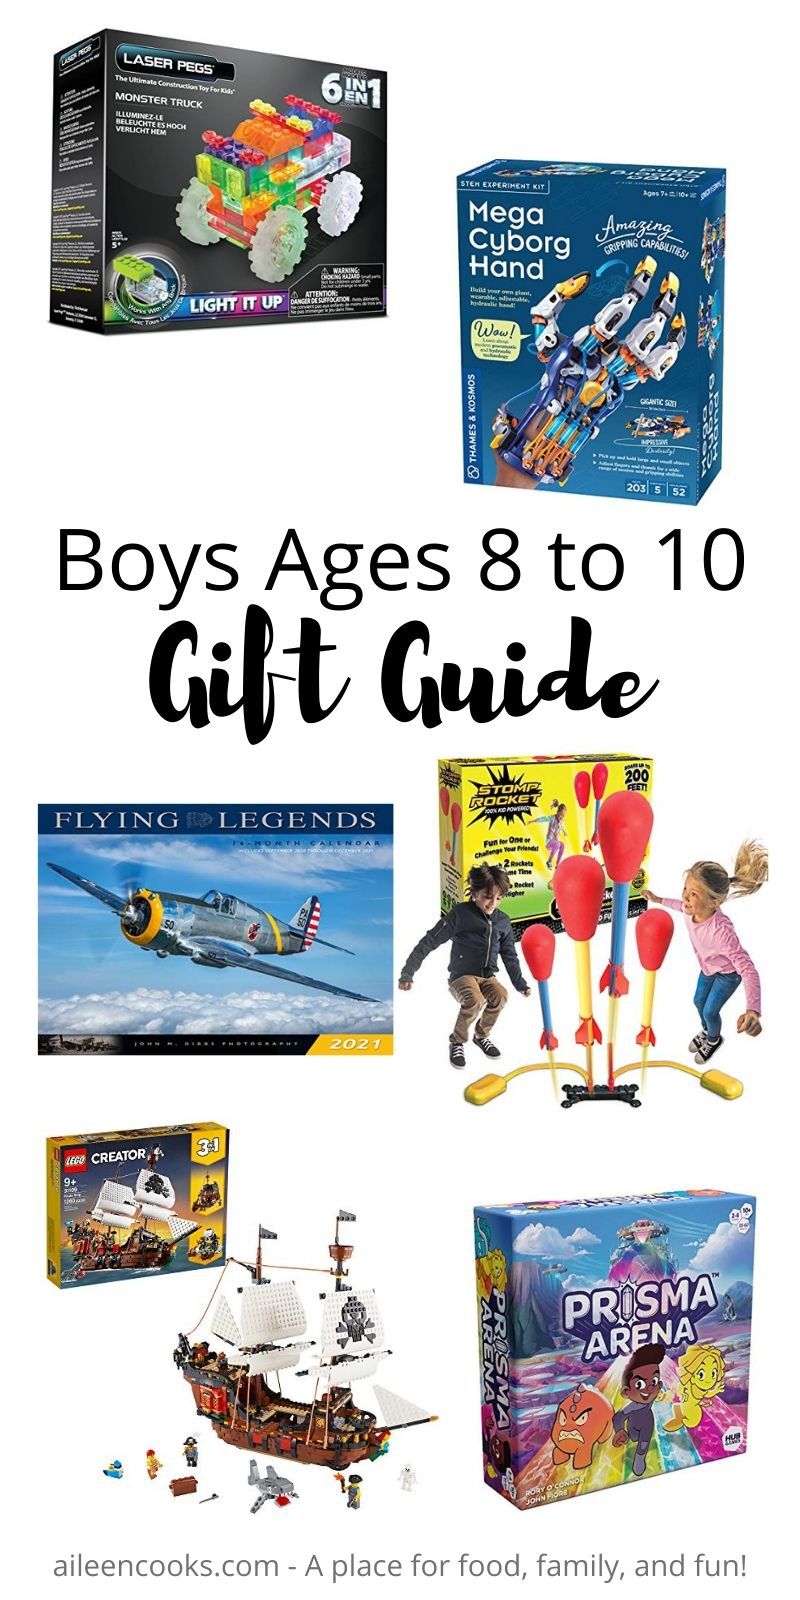 Collage photo of gift ideas for boys with words "boys ages 8 to 10 gift guide" in black lettering.